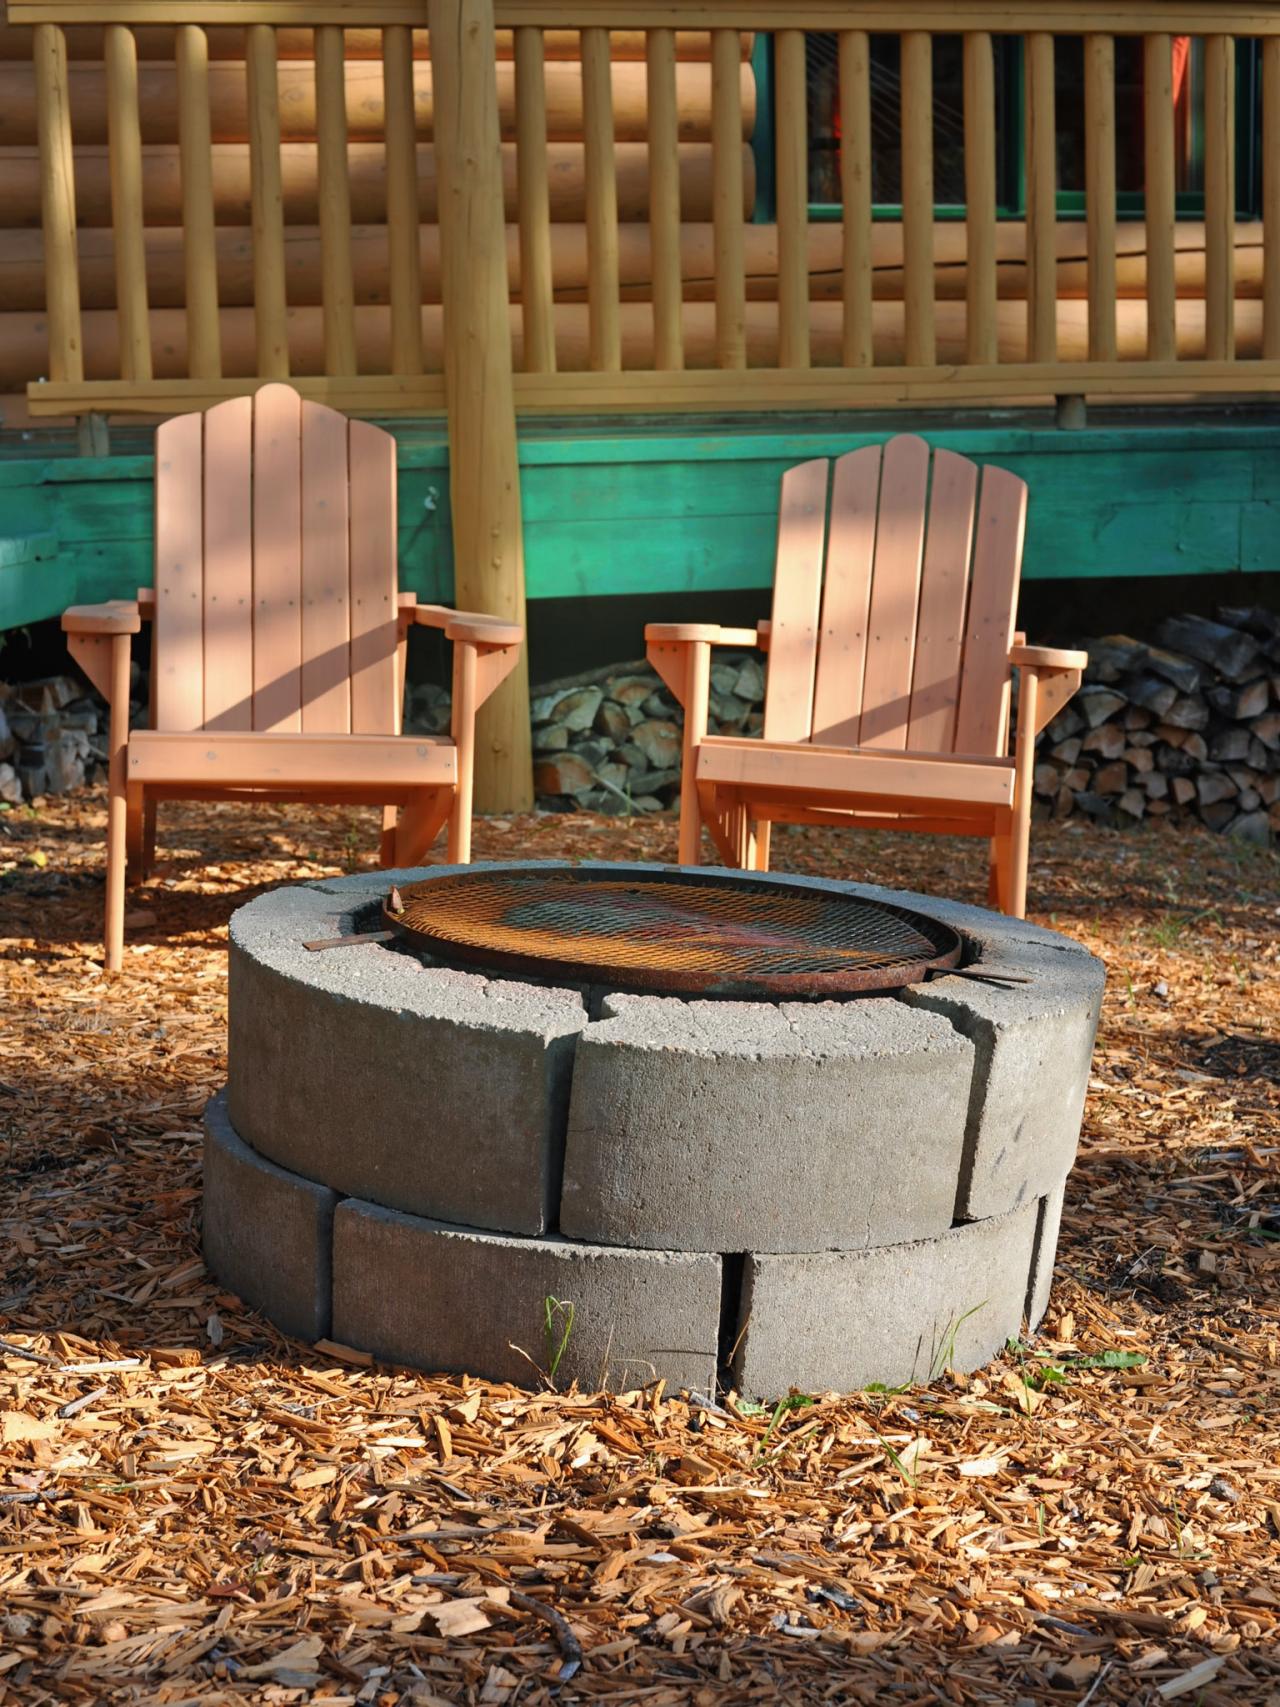 Cinder Block Fire Pits Design Ideas, What Type Of Mortar To Use For Fire Pit